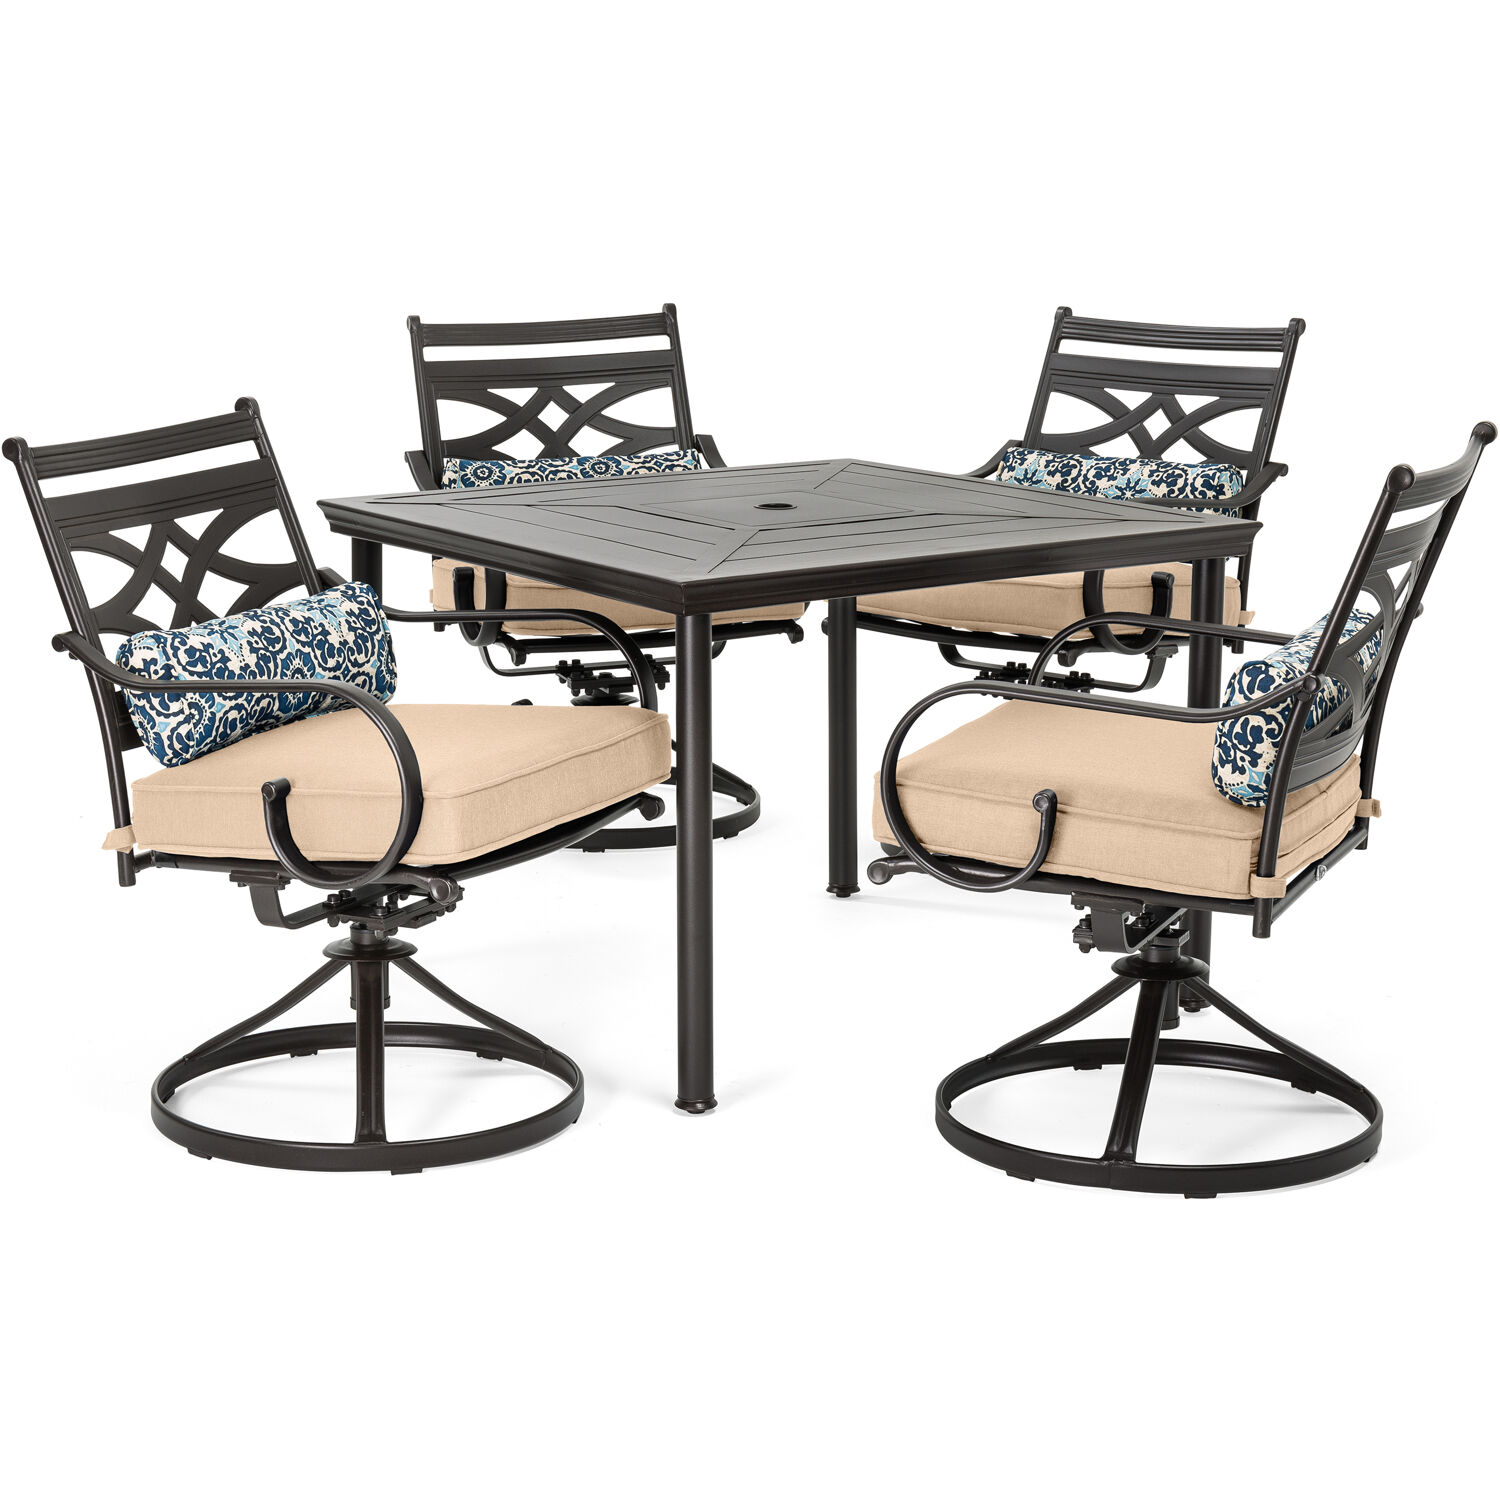 Hanover Montclair 5-Piece Steel Patio Dining Set in Tan with 4 Swivel Rockers and a Square Table - image 1 of 12